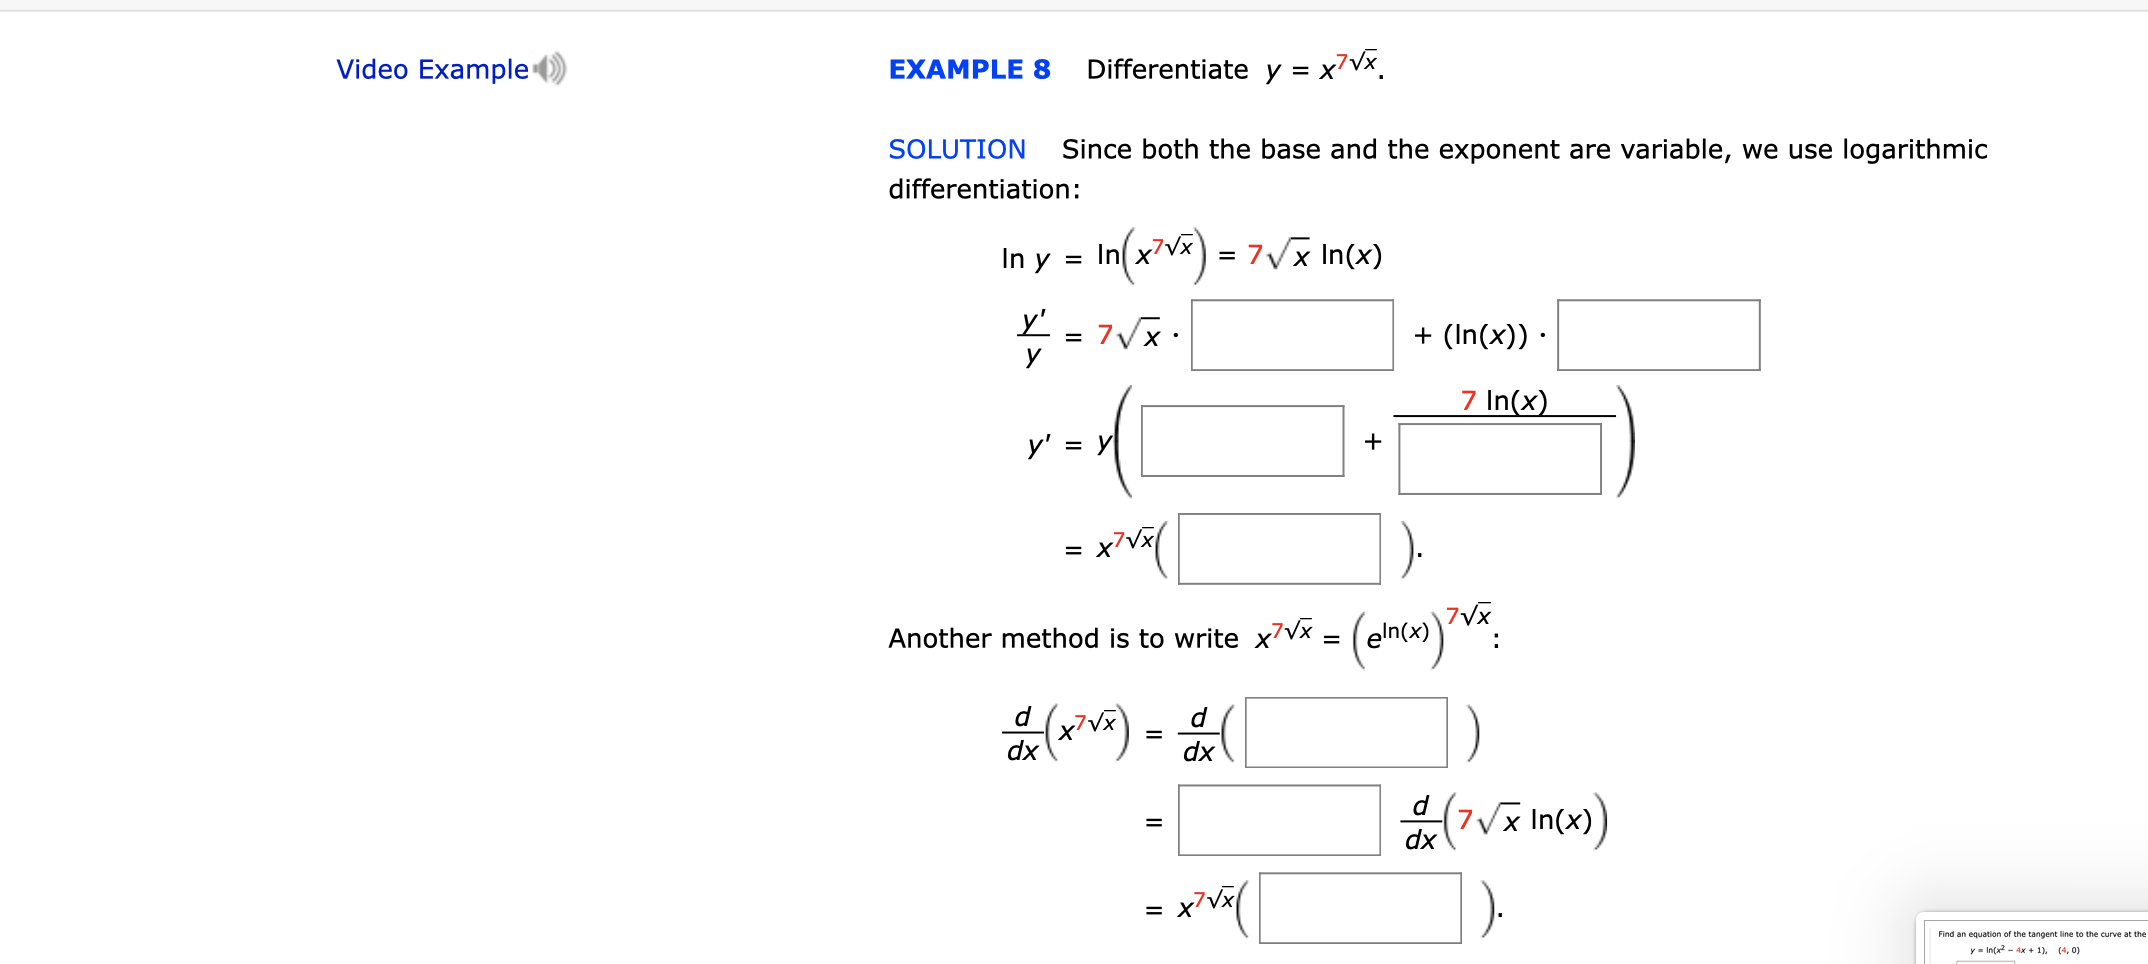 Video Example
Differentiate y = x7Vx
EXAMPLE 8
Since both the base and the exponent are variable, we use logarithmic
SOLUTION
differentiation:
In(2)7
7Vx In(x)
In y
=
y'
7VX
У
(In(x))
7 In(x)
у' %3D У
x'Vx
7VX
eln(x)
Another method is to write x7Vx =
d
d
dx
dx
d
7x In(x)
dx
x7Vx
=
yIn(x2-4x +1), (4, 0)
